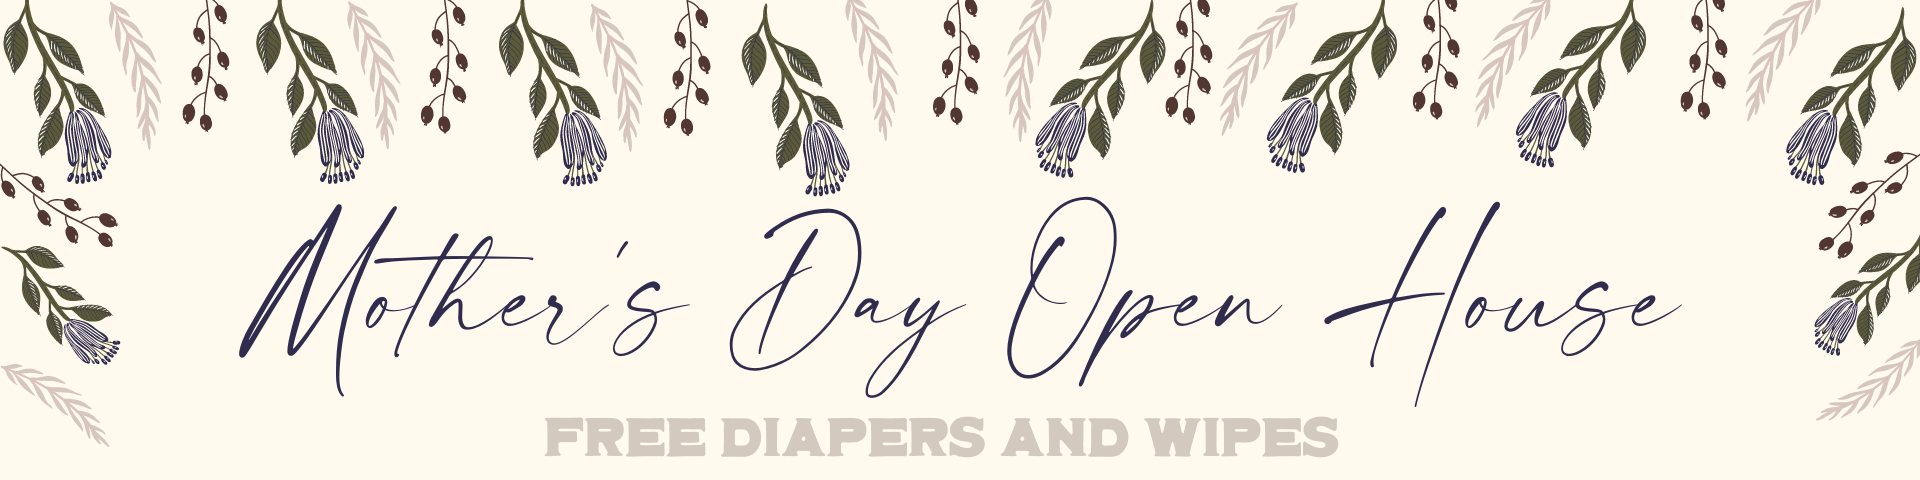 Mothers-Day-Open-House-Google-Banner